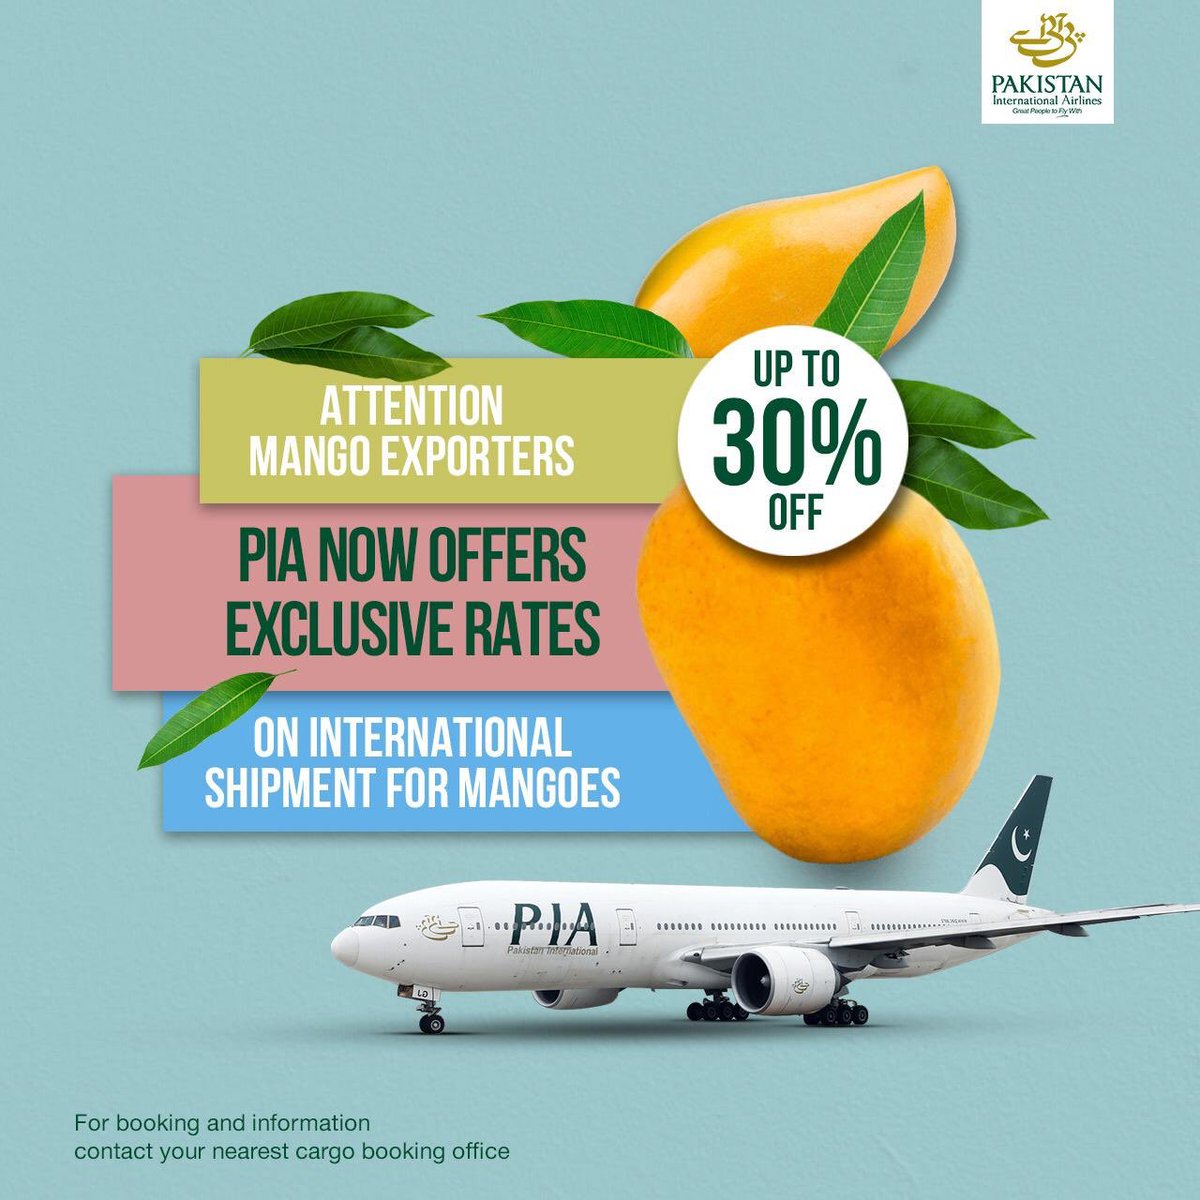 GOOD NEWS!!

During the COVID crisis we are offering exclusive rates to mango exporters on international shipments so the world can keep on enjoying the best Pakistani mangoes. 

Contact the nearest cargo booking office and book now!

#PIA #PIACares